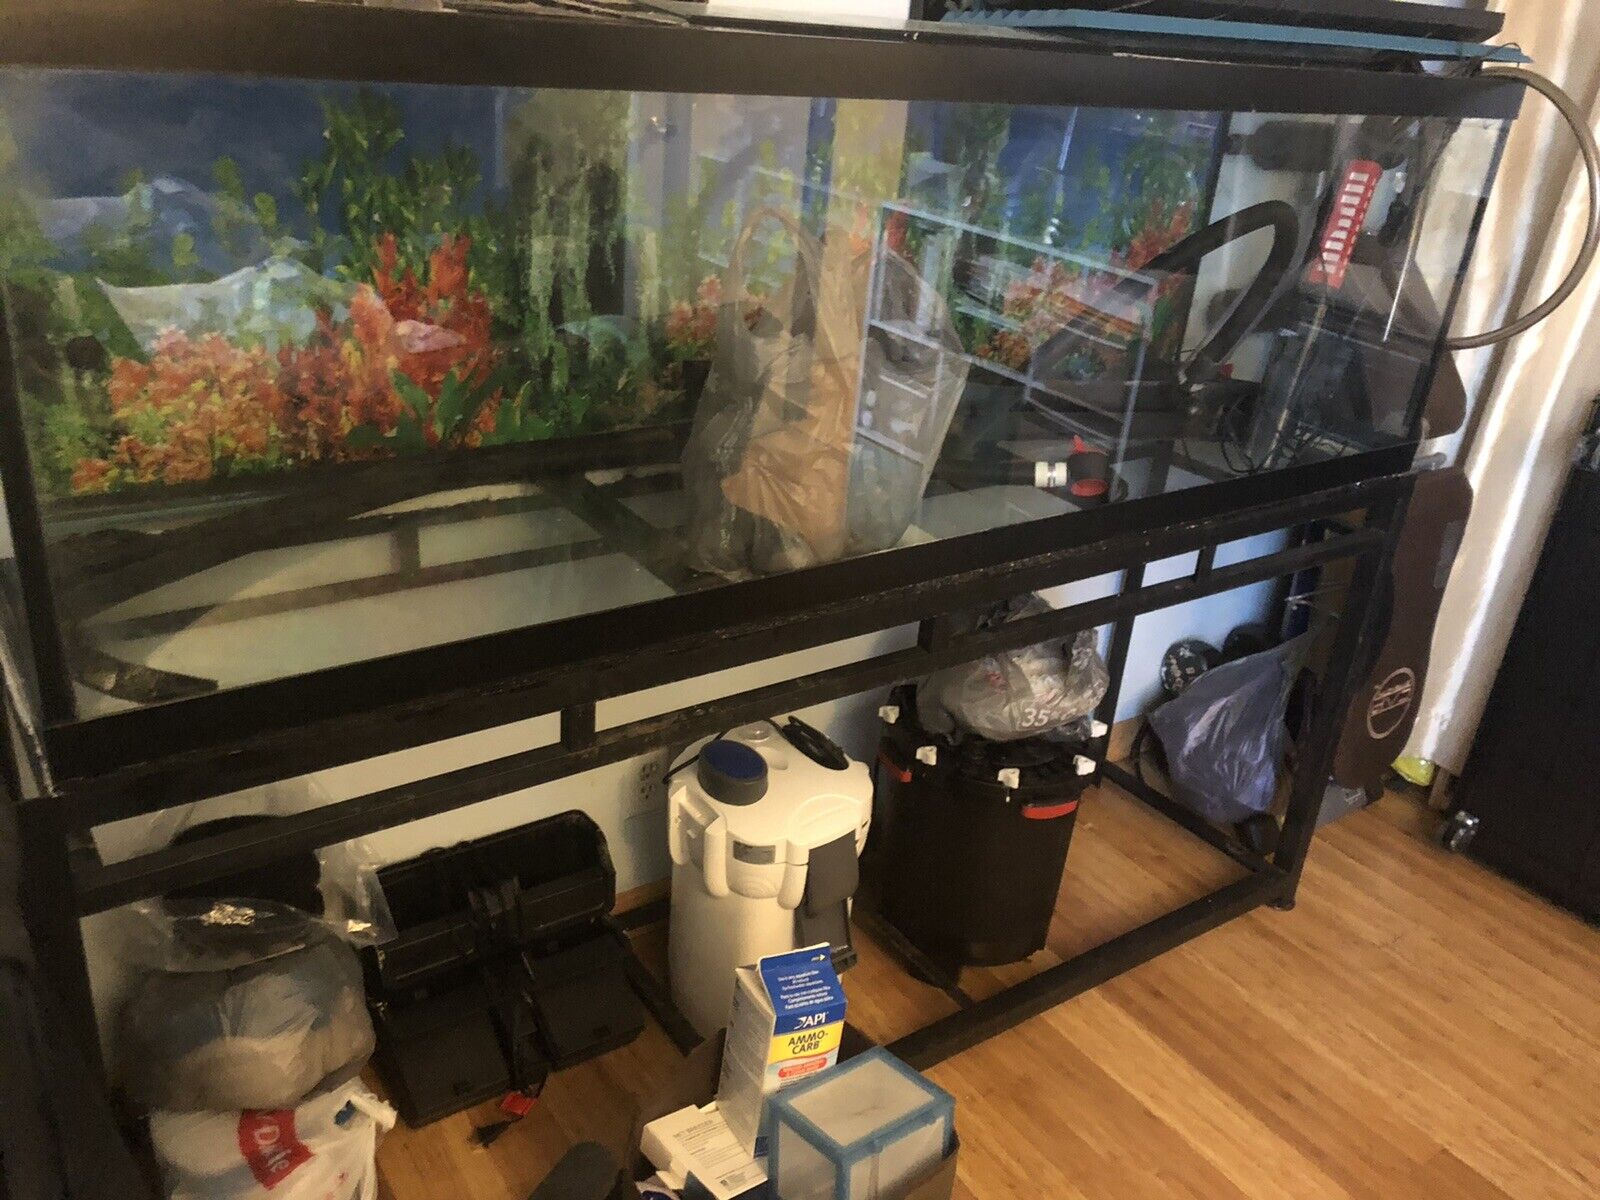 125 GAL AQUARIUM AND METAL STAND WITH 5 PUMPS PLUS MORE. ***